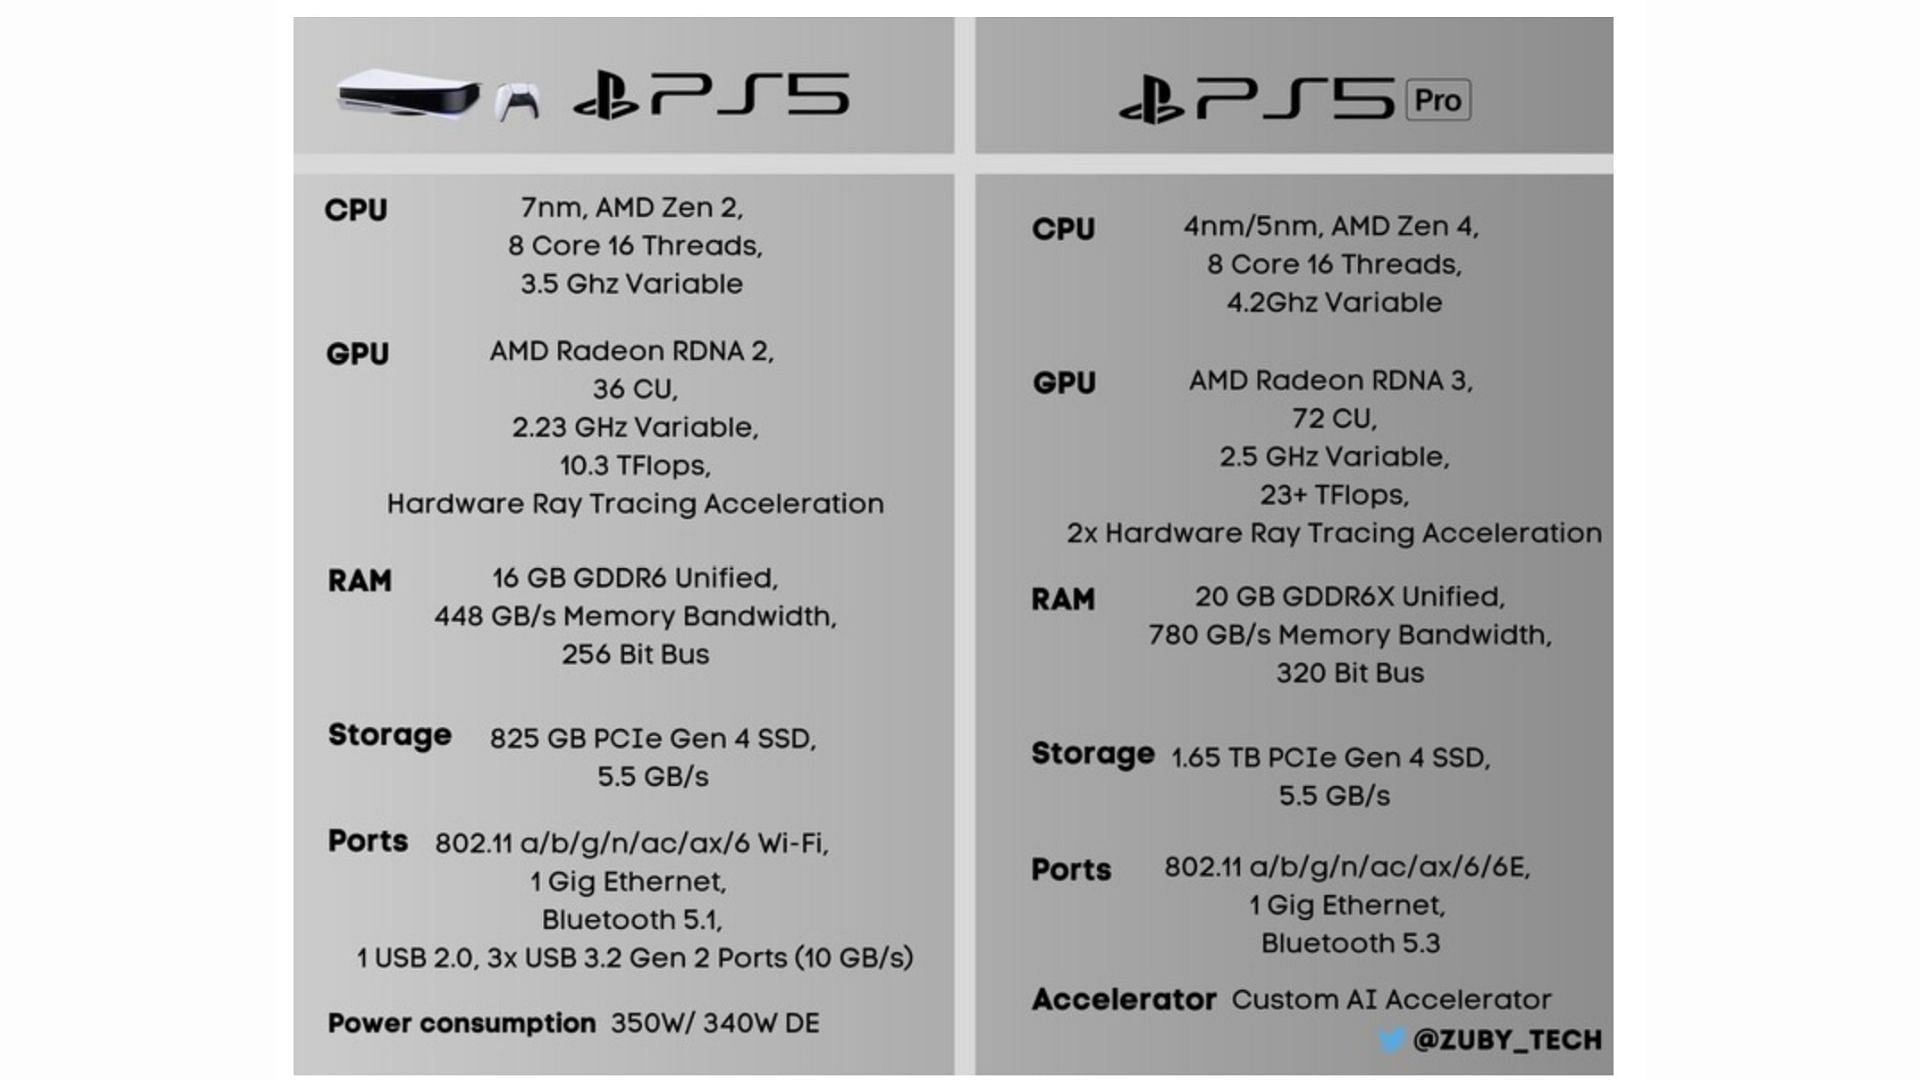 PS5 Pro: Release Date, Price, Specs, Rumors & More